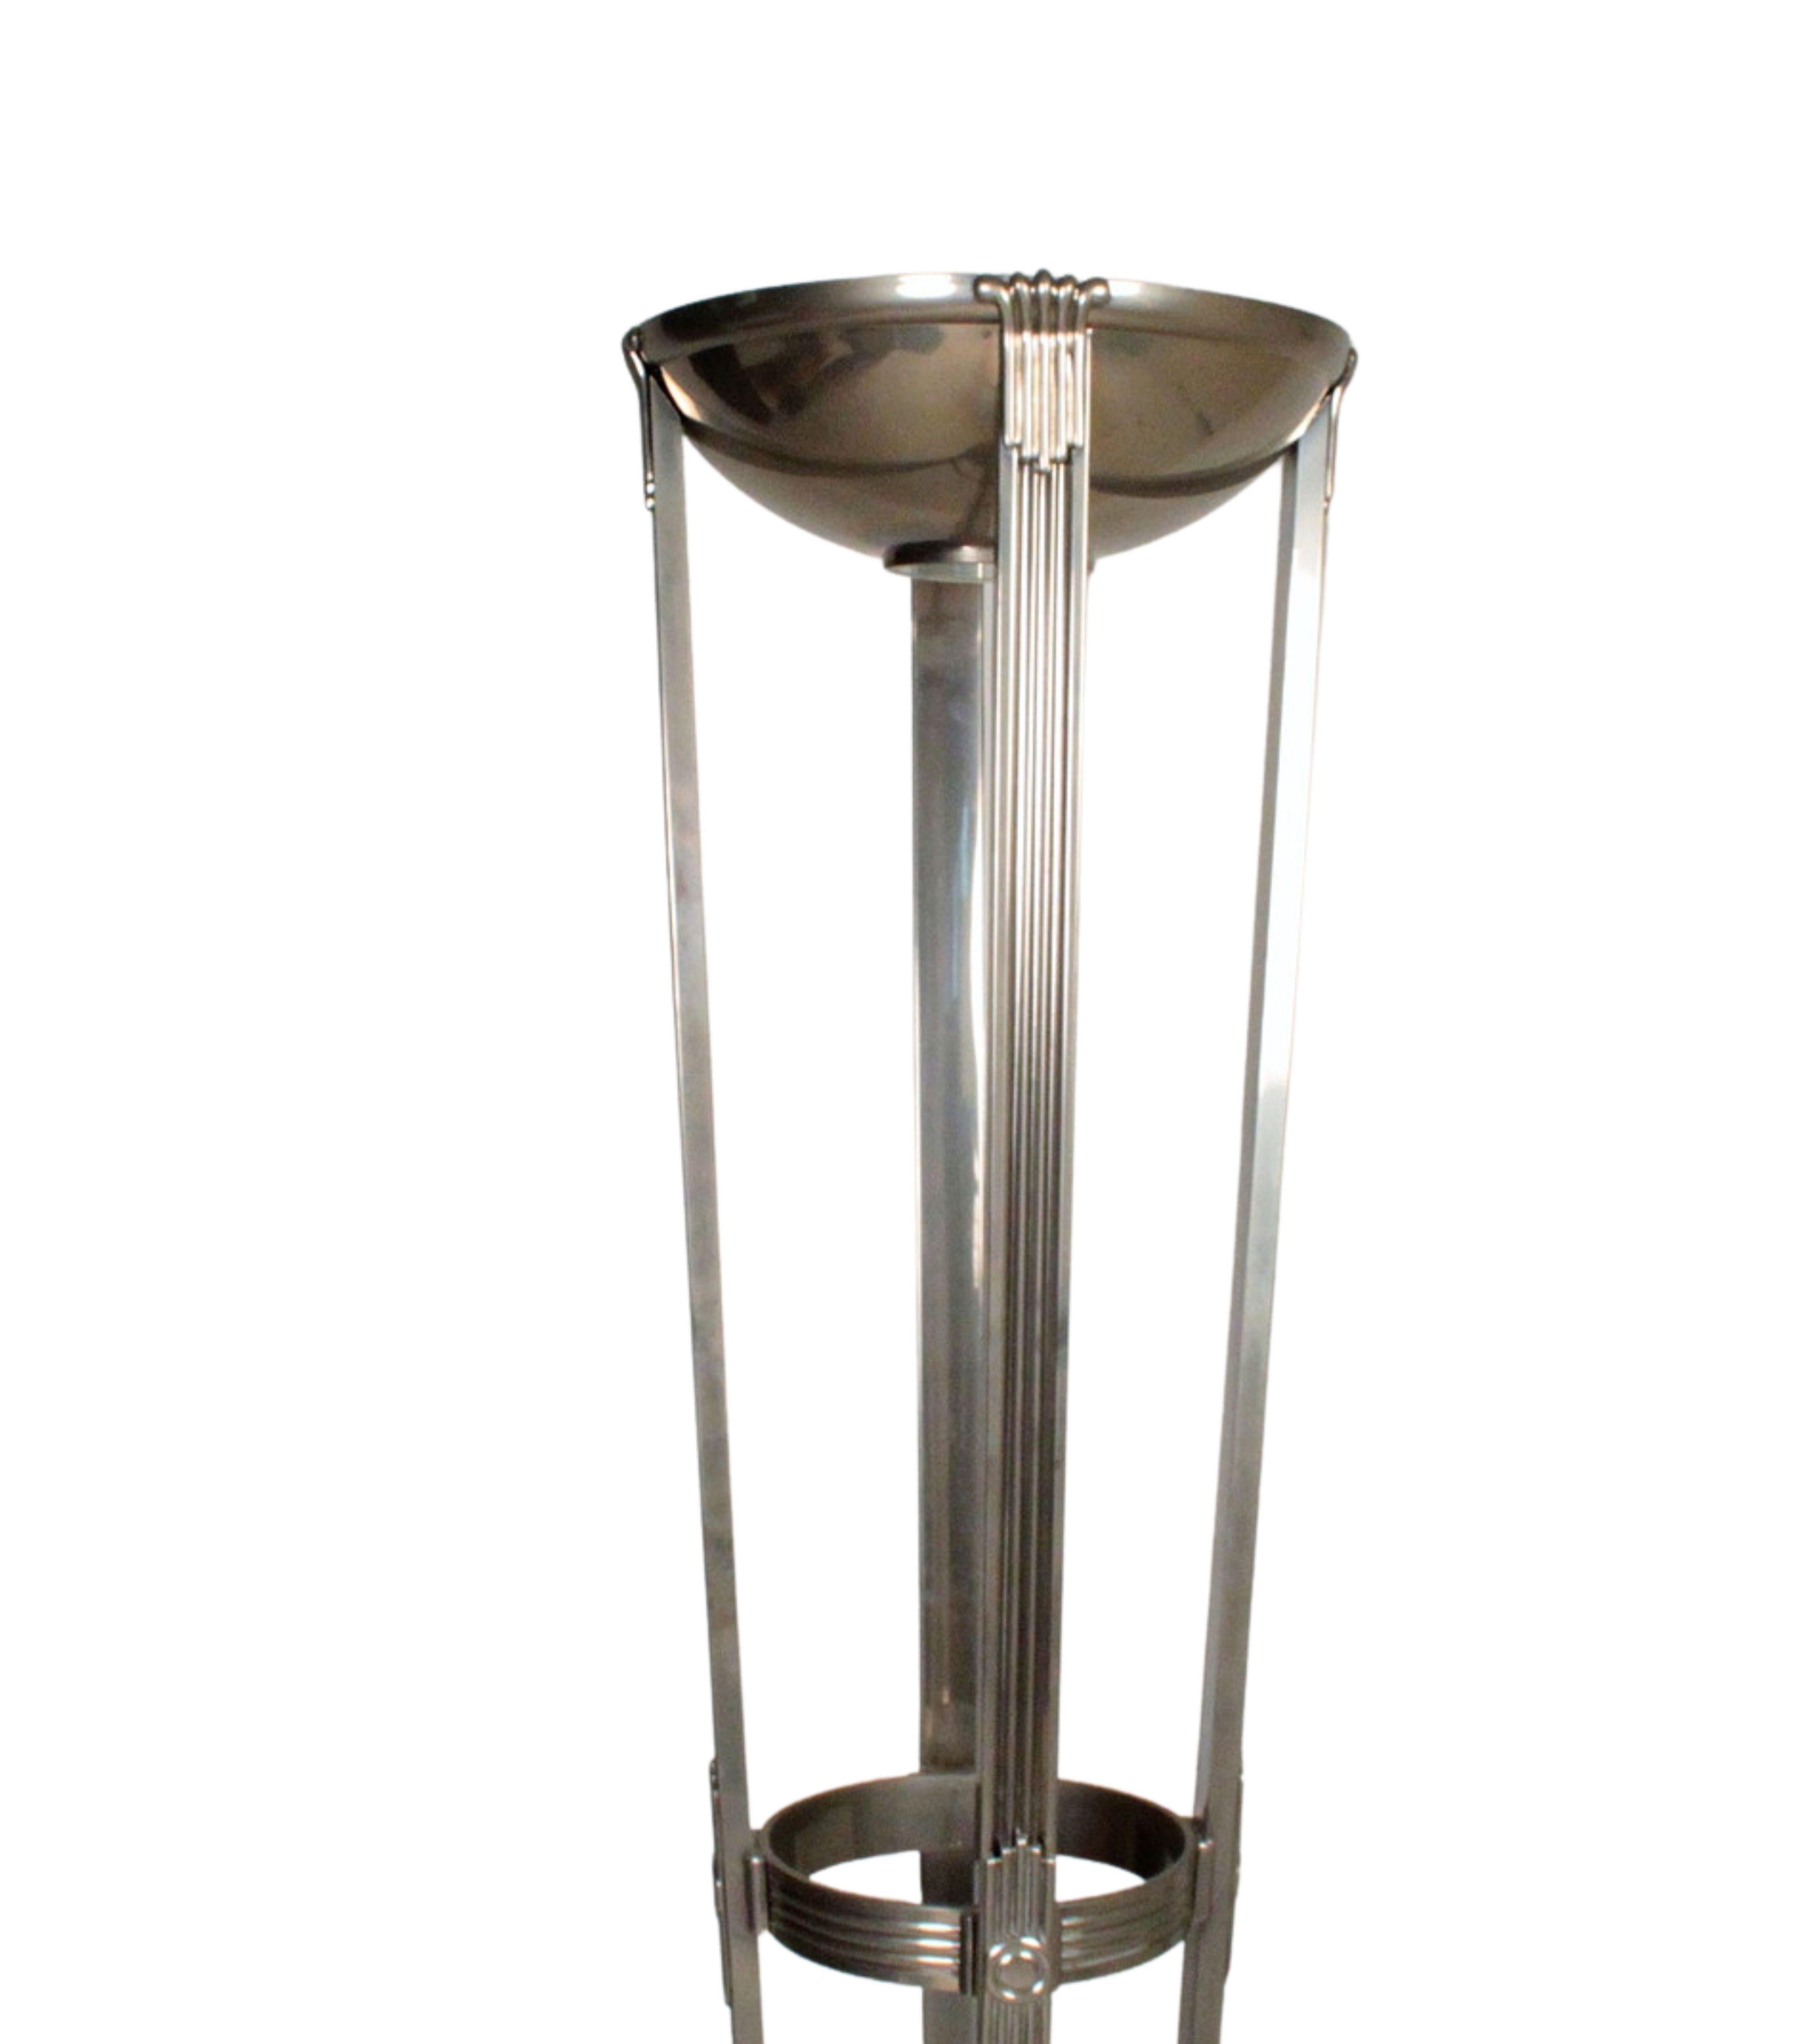 This art deco style floor lamp from the 1970s is a unique and impressive work of art made from chrome-plated metal and frosted glass. Its striking design and quality materials make it a timeless addition to any modern or contemporary interior.